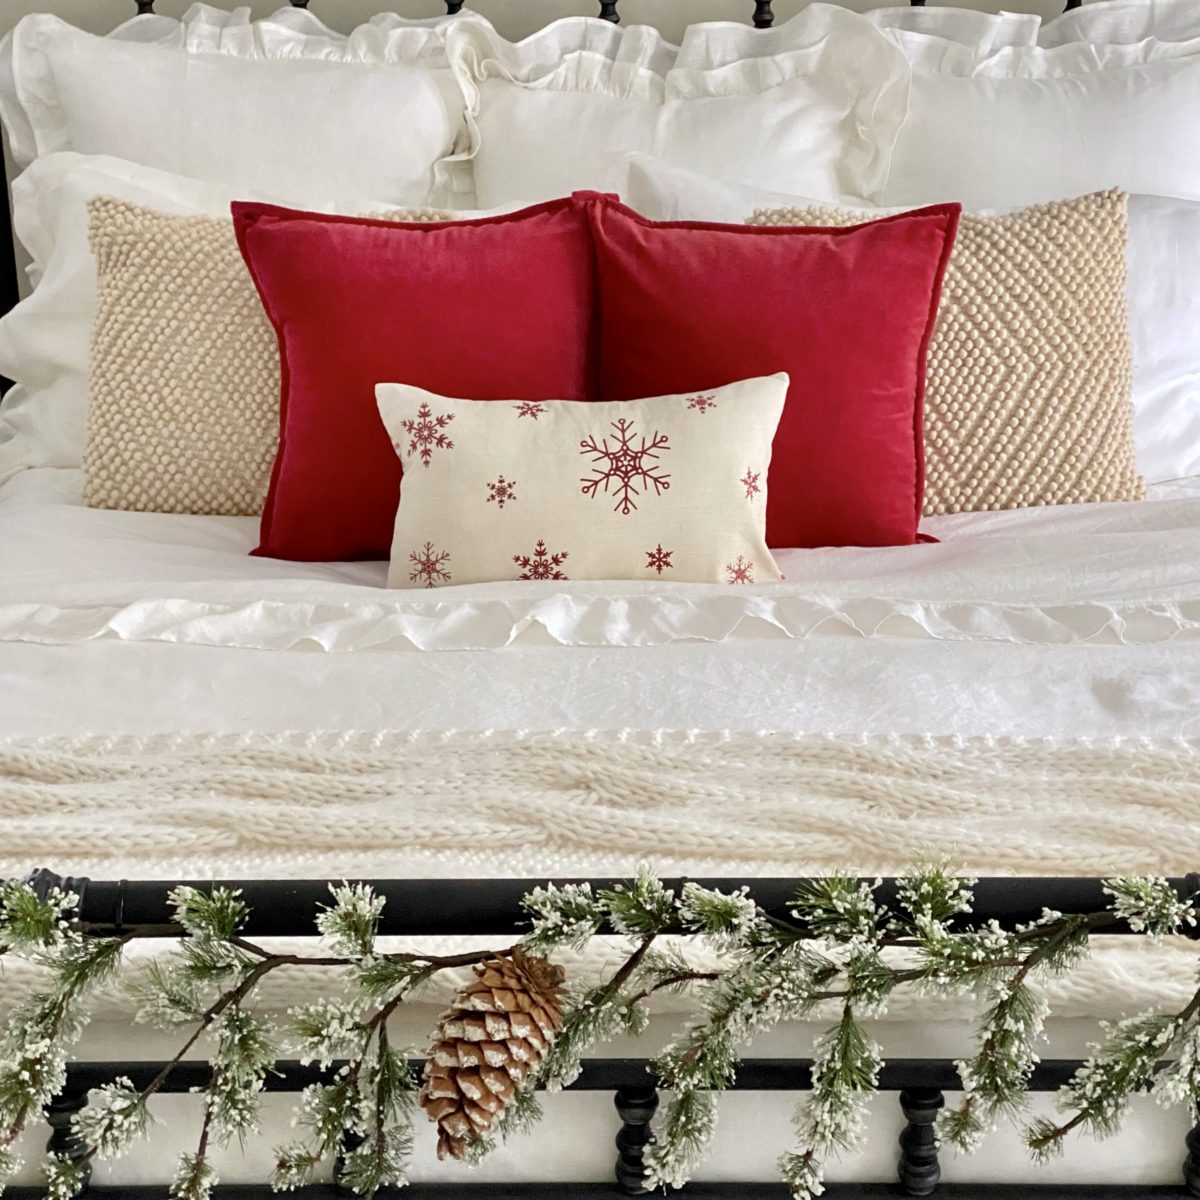 White ruffle euro shams with textured cream pillows, red velvet pillows and a red snowflake pillow at the head of the bed.